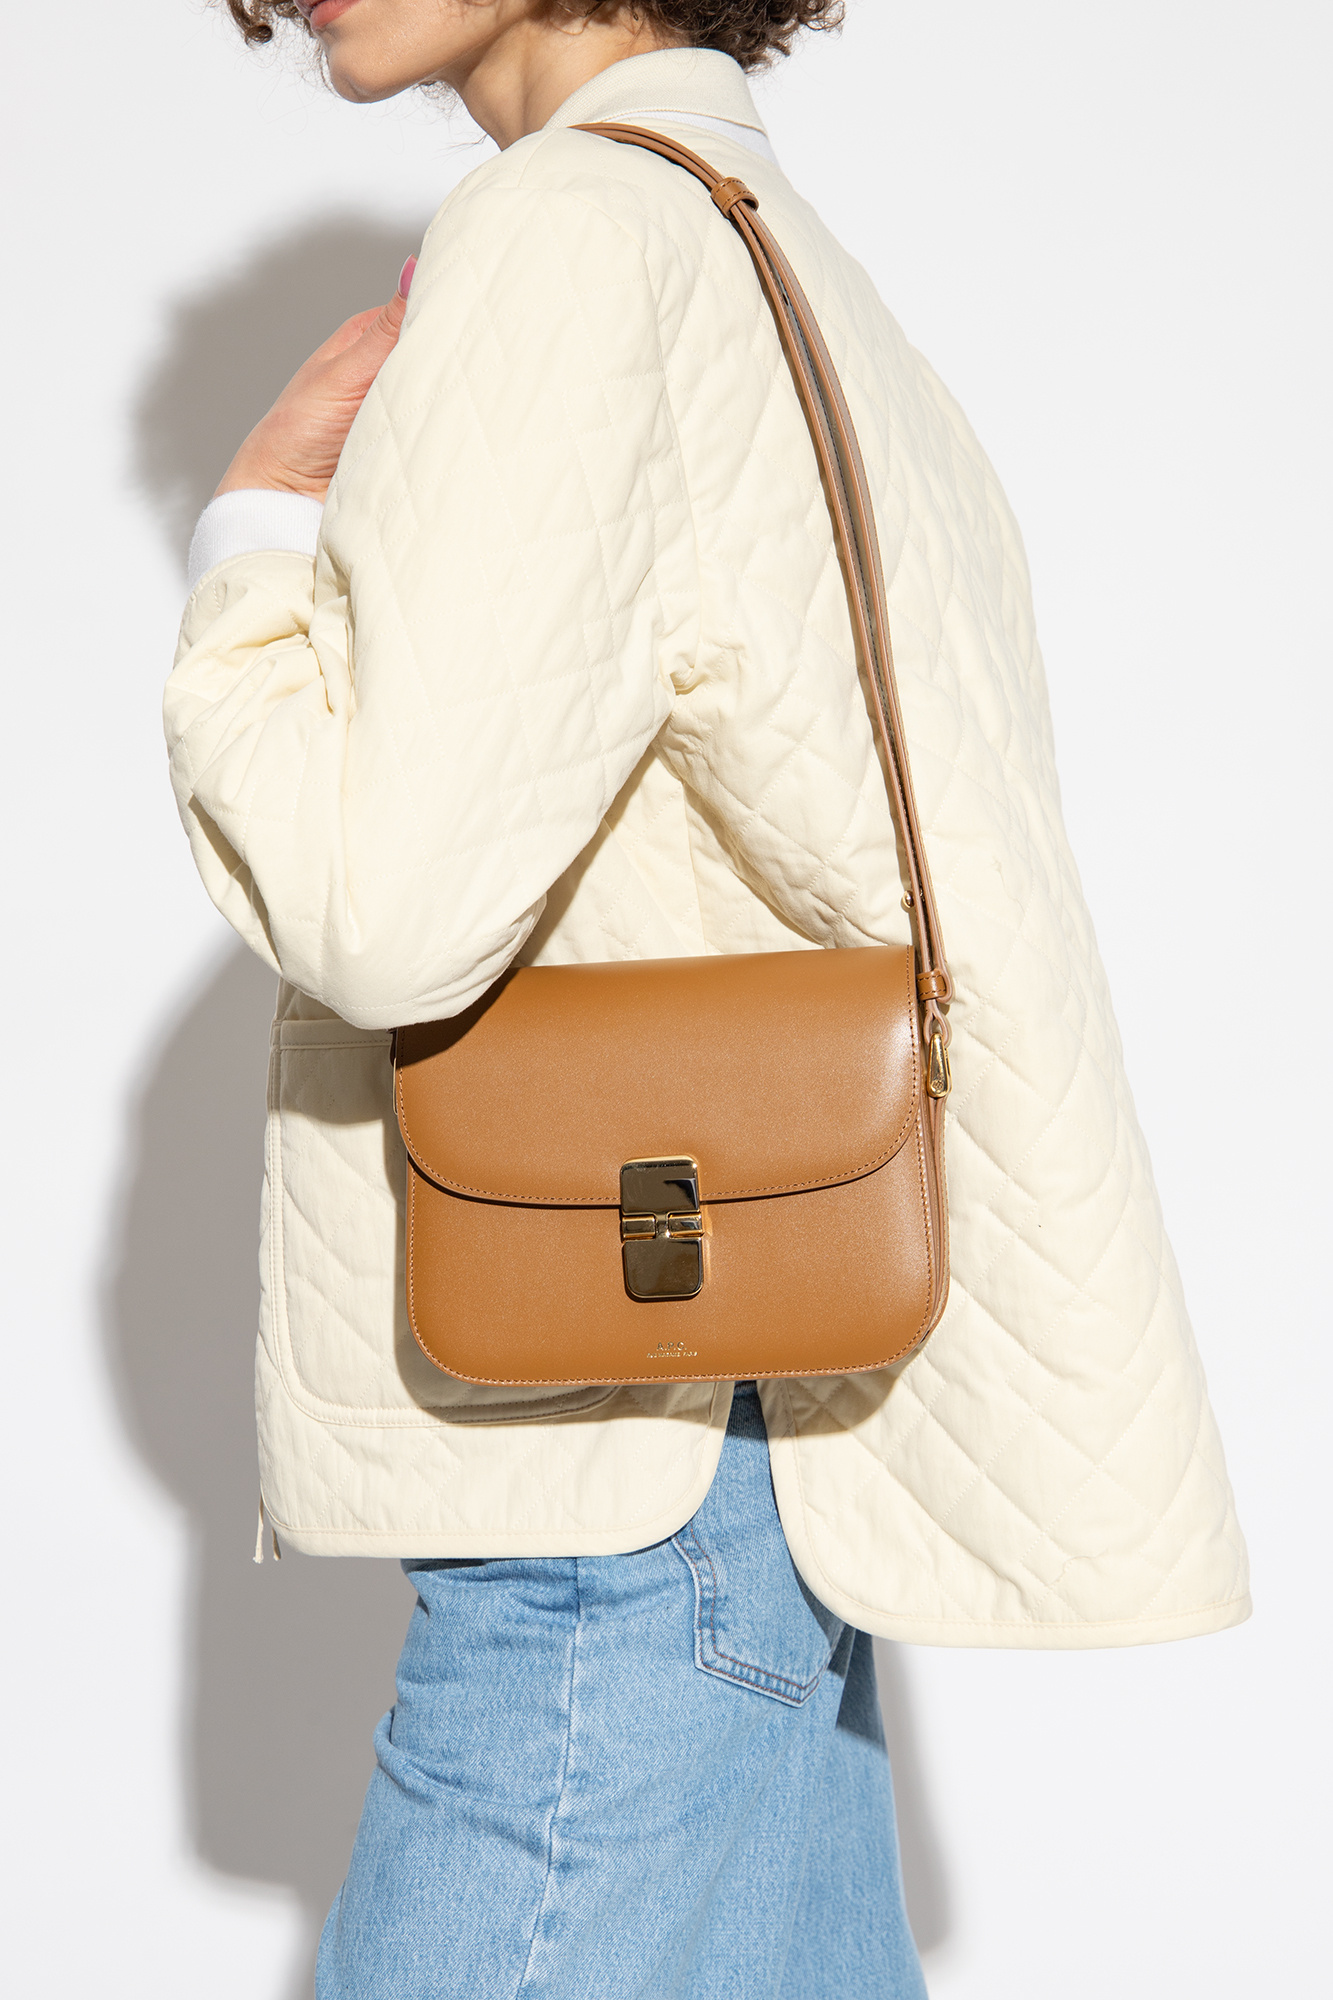 A.p.c. Grace Small Bag - Leather - Pink Beige